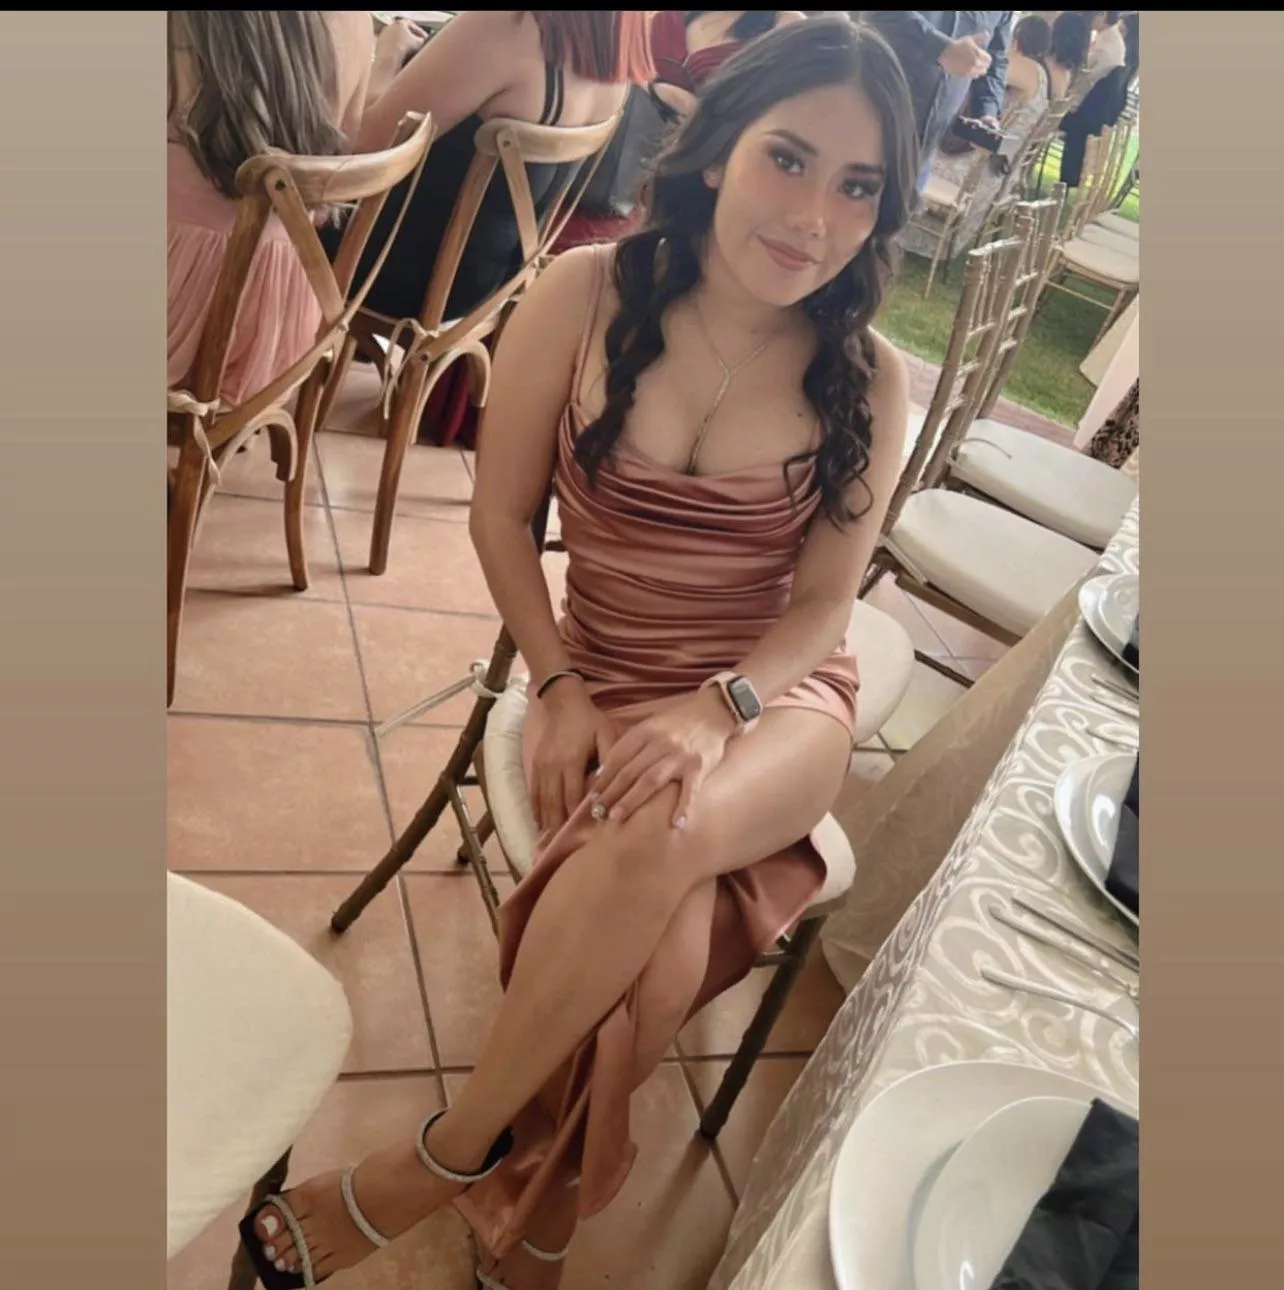 Looking for these slutty Latina whore to be degraded and blasted on your cum  she's begging to get covered in warm cum!! Who thinks they can handle these  cute whore begging for